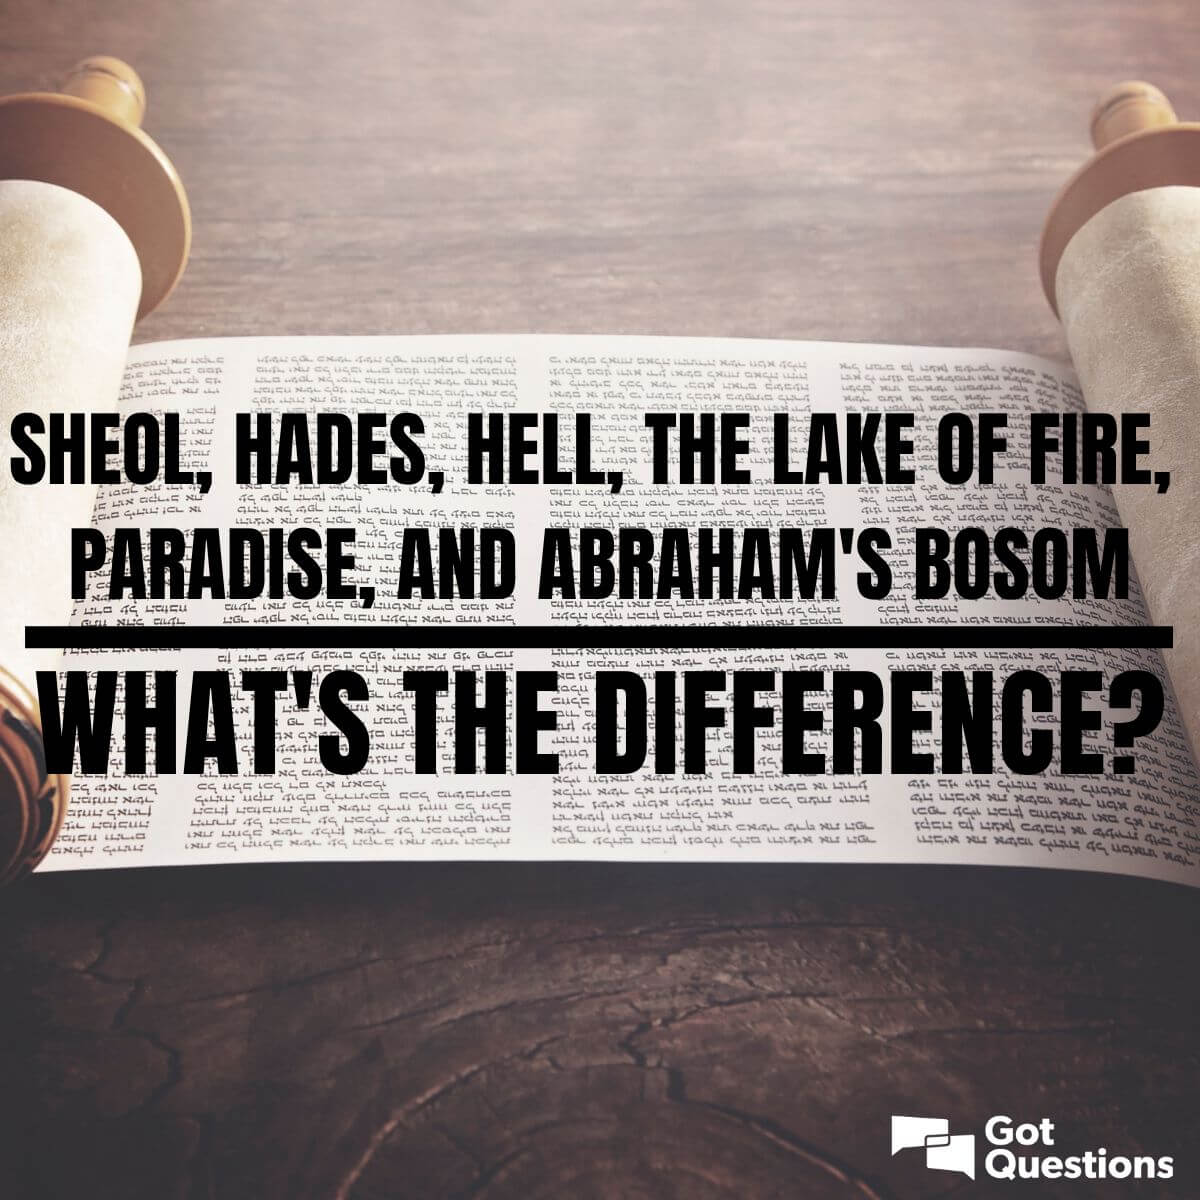 Center for Spiritual Enrichment - What is Heaven/Paradise, Sheol/Hades, and  Hell/Gehenna in the the Bible? Find out by completing this lesson outline  and join in this Friday November 27 at 7 pm